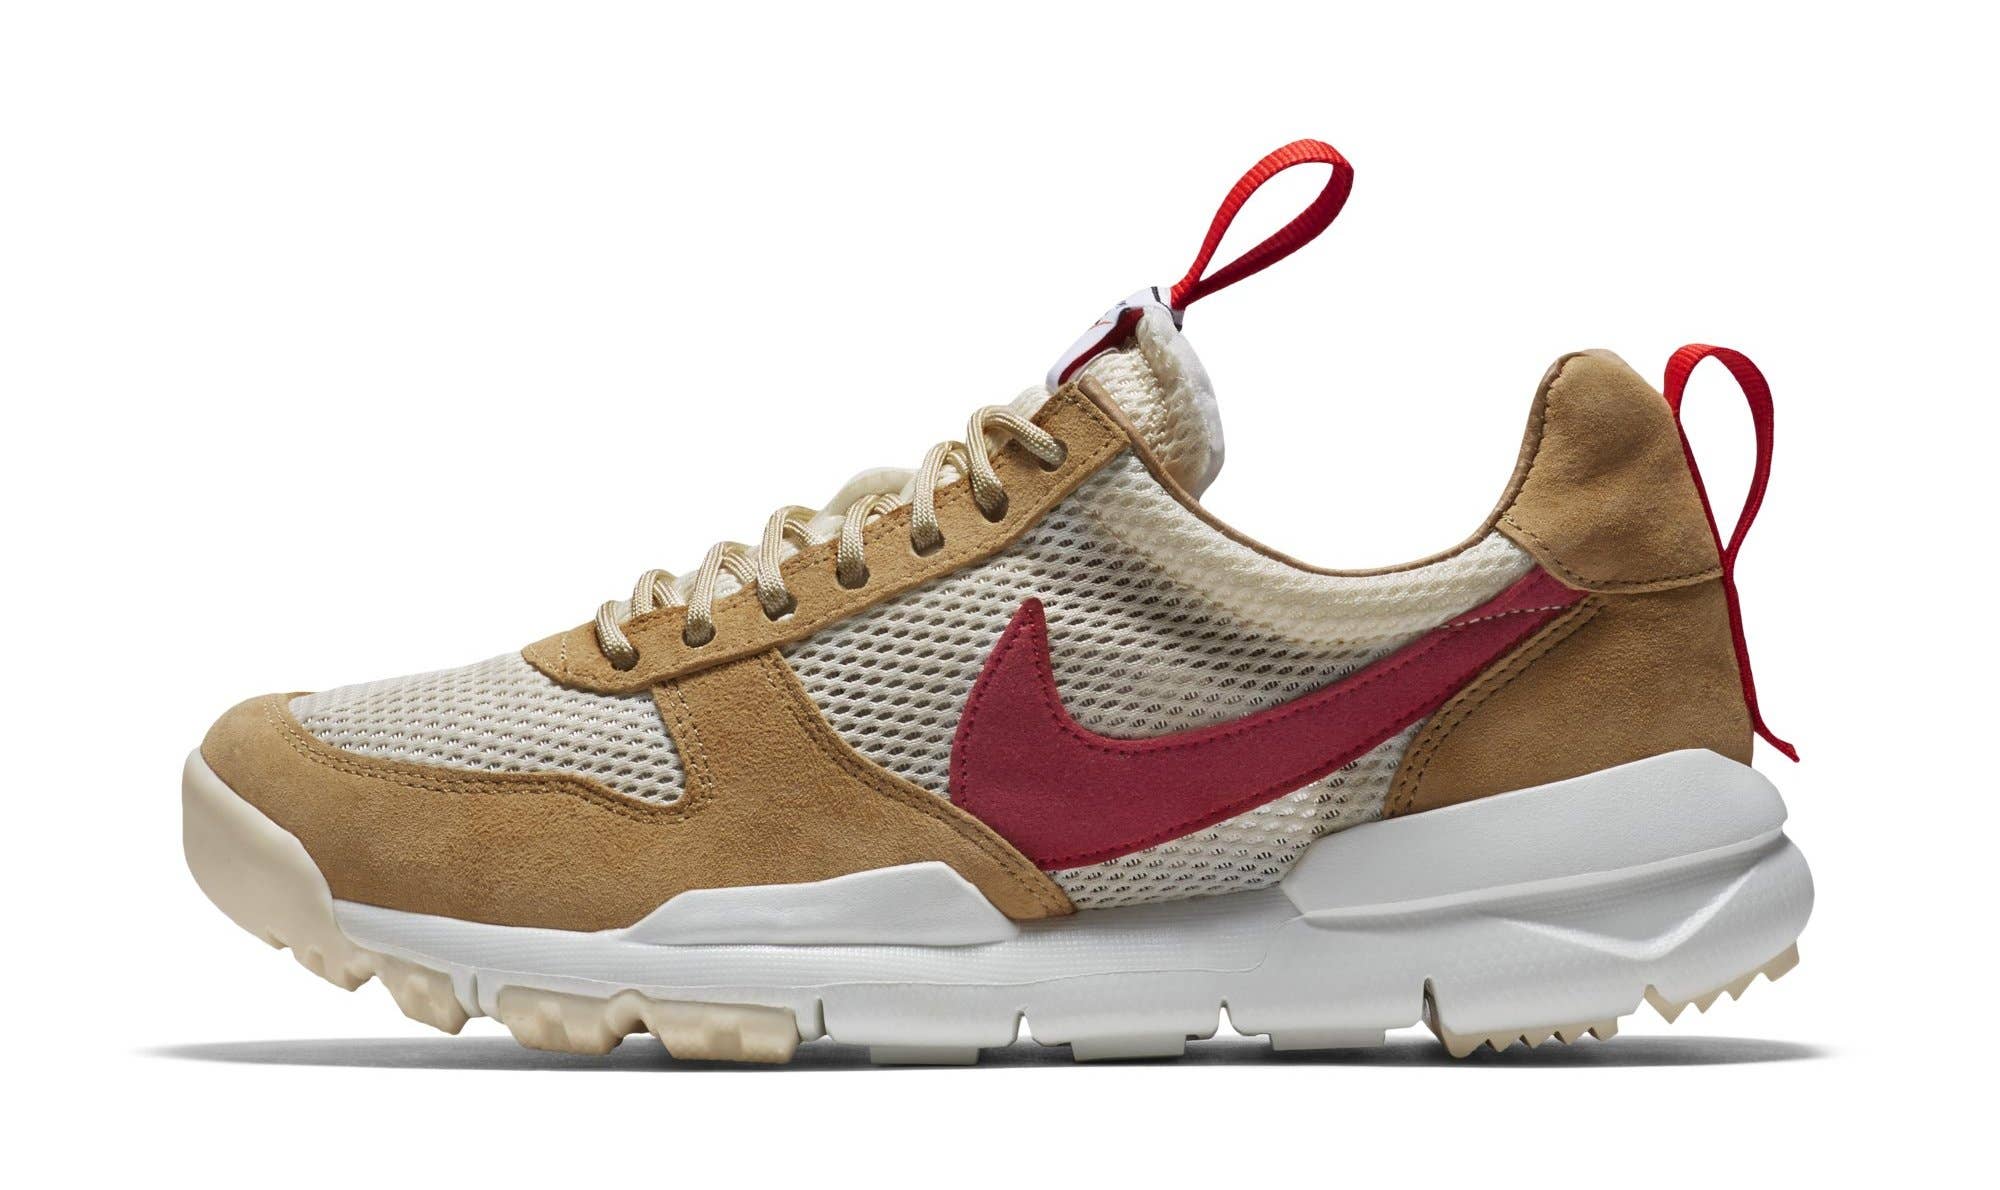 Nike Covered Up a Reference to Slave Work on Tom Sachs Sneaker Box